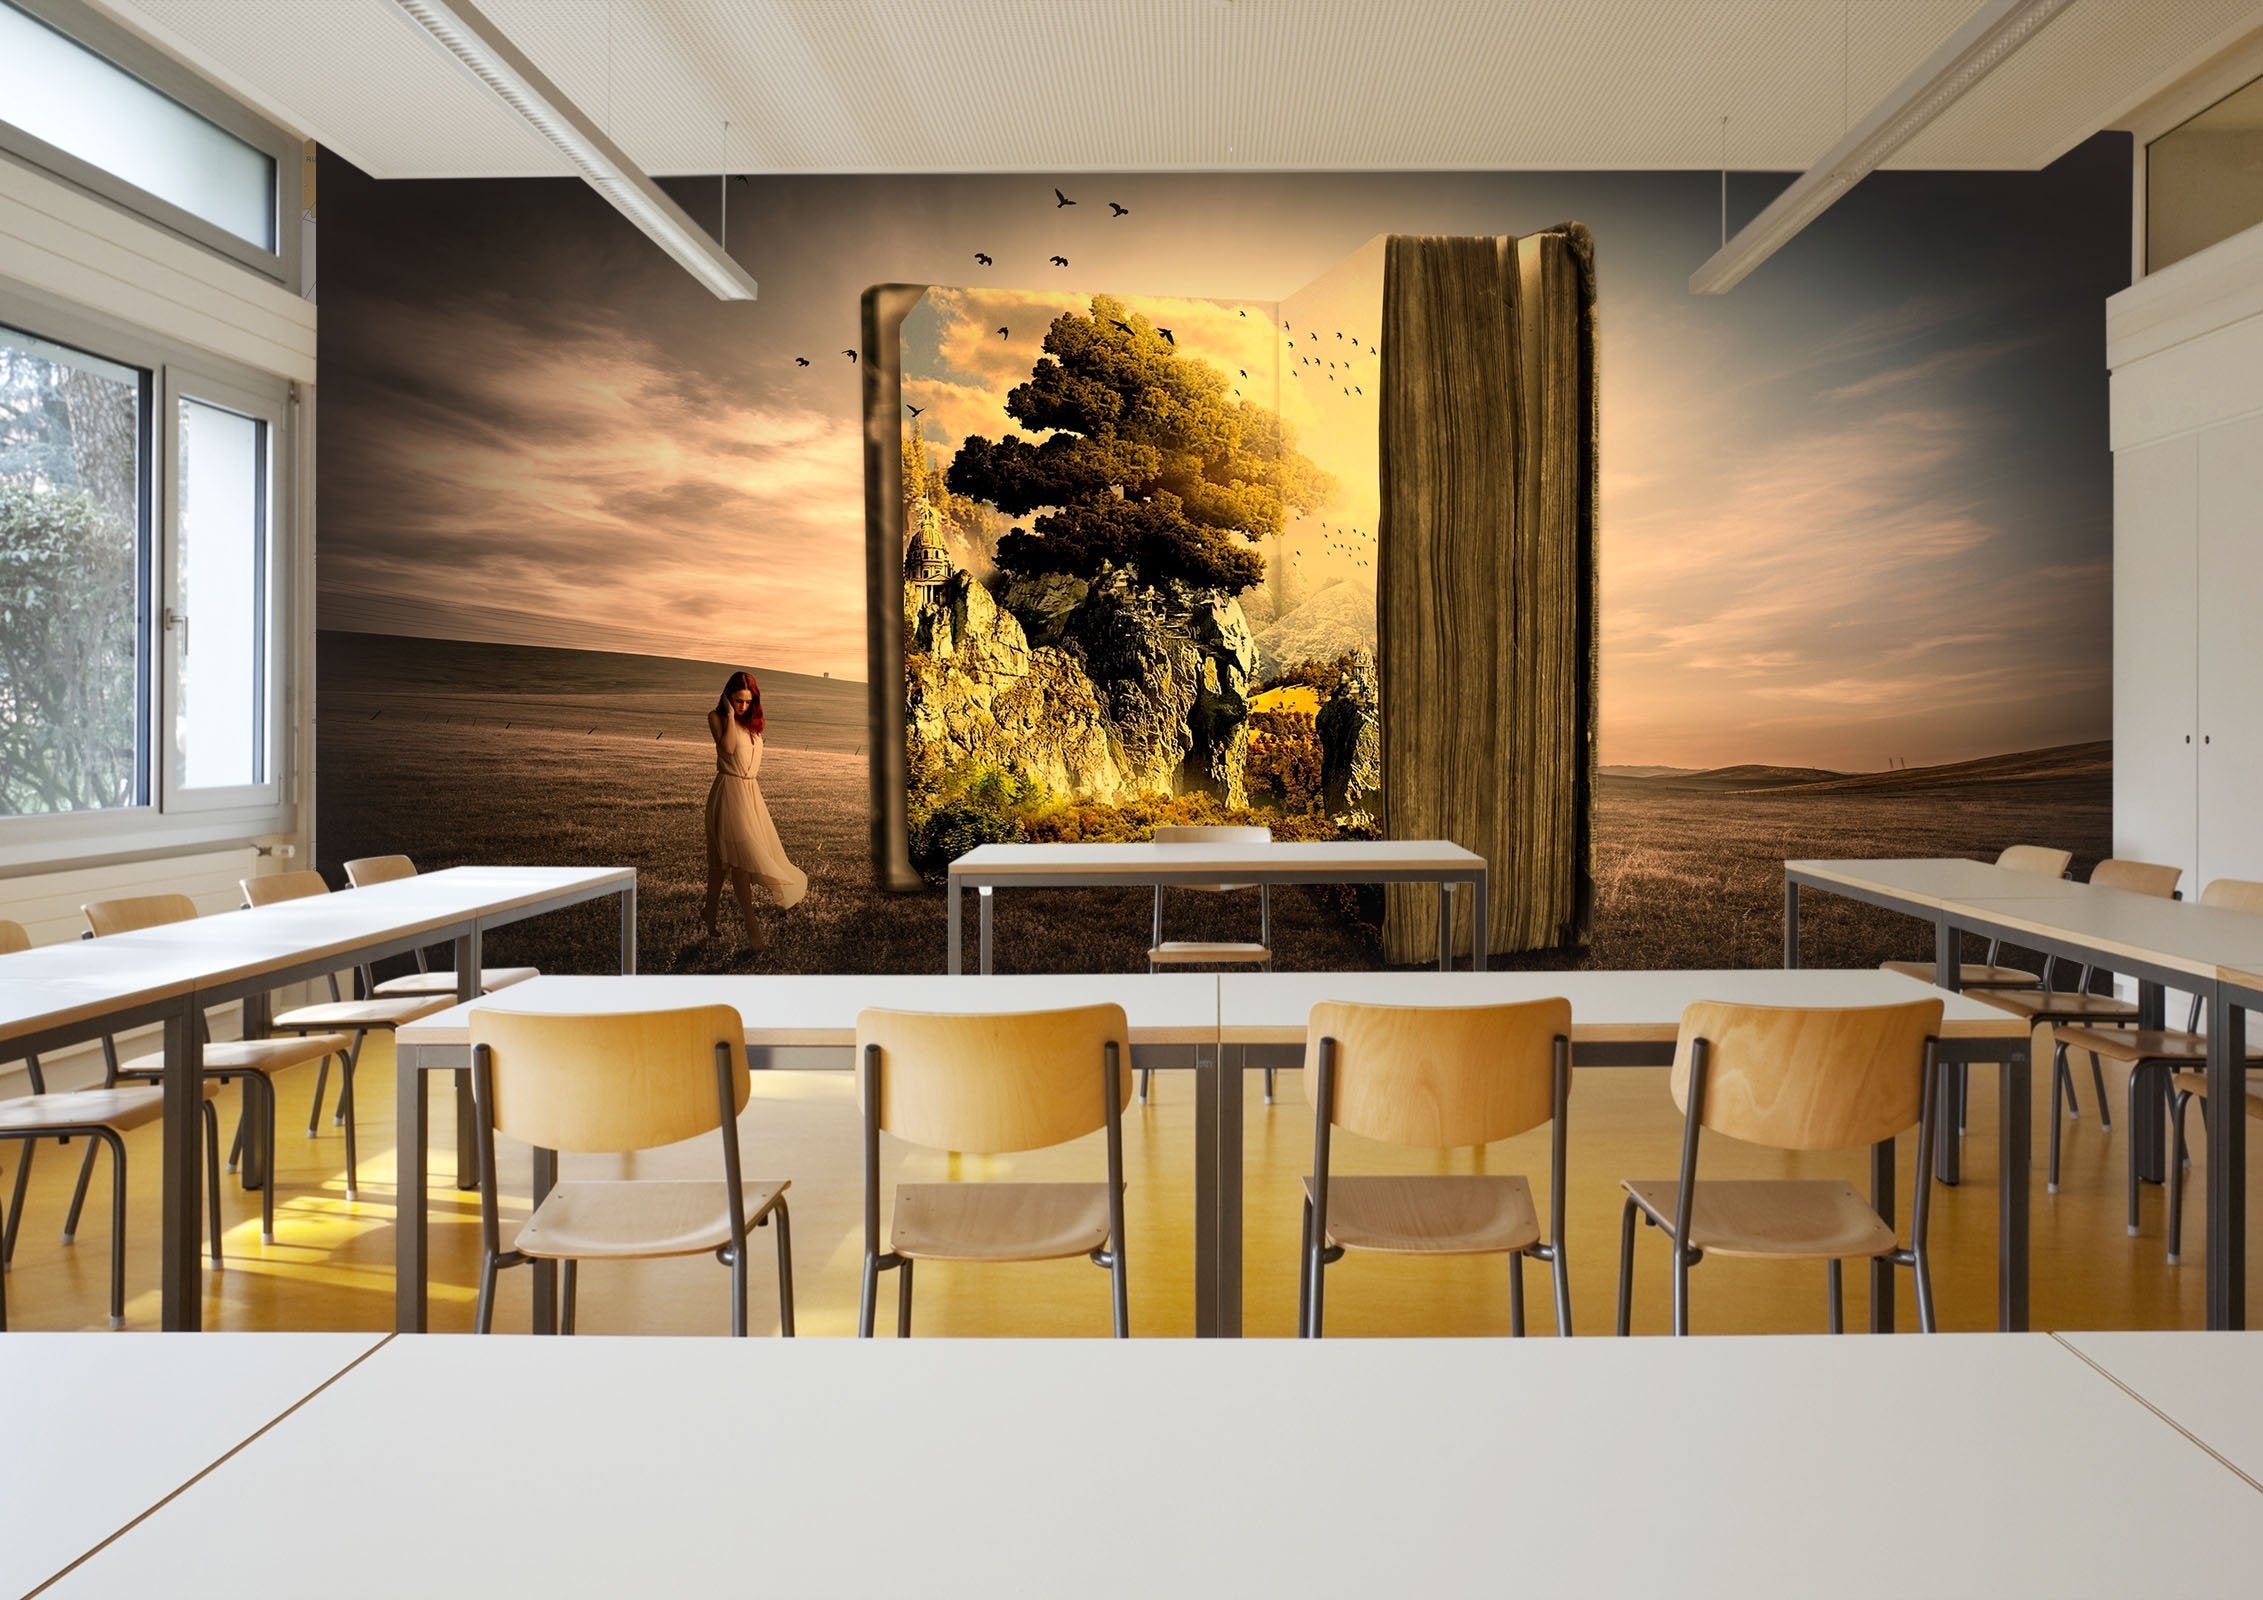 3D Mountain in the book with a girl 10 Wall Murals Wallpaper AJ Wallpaper 2 